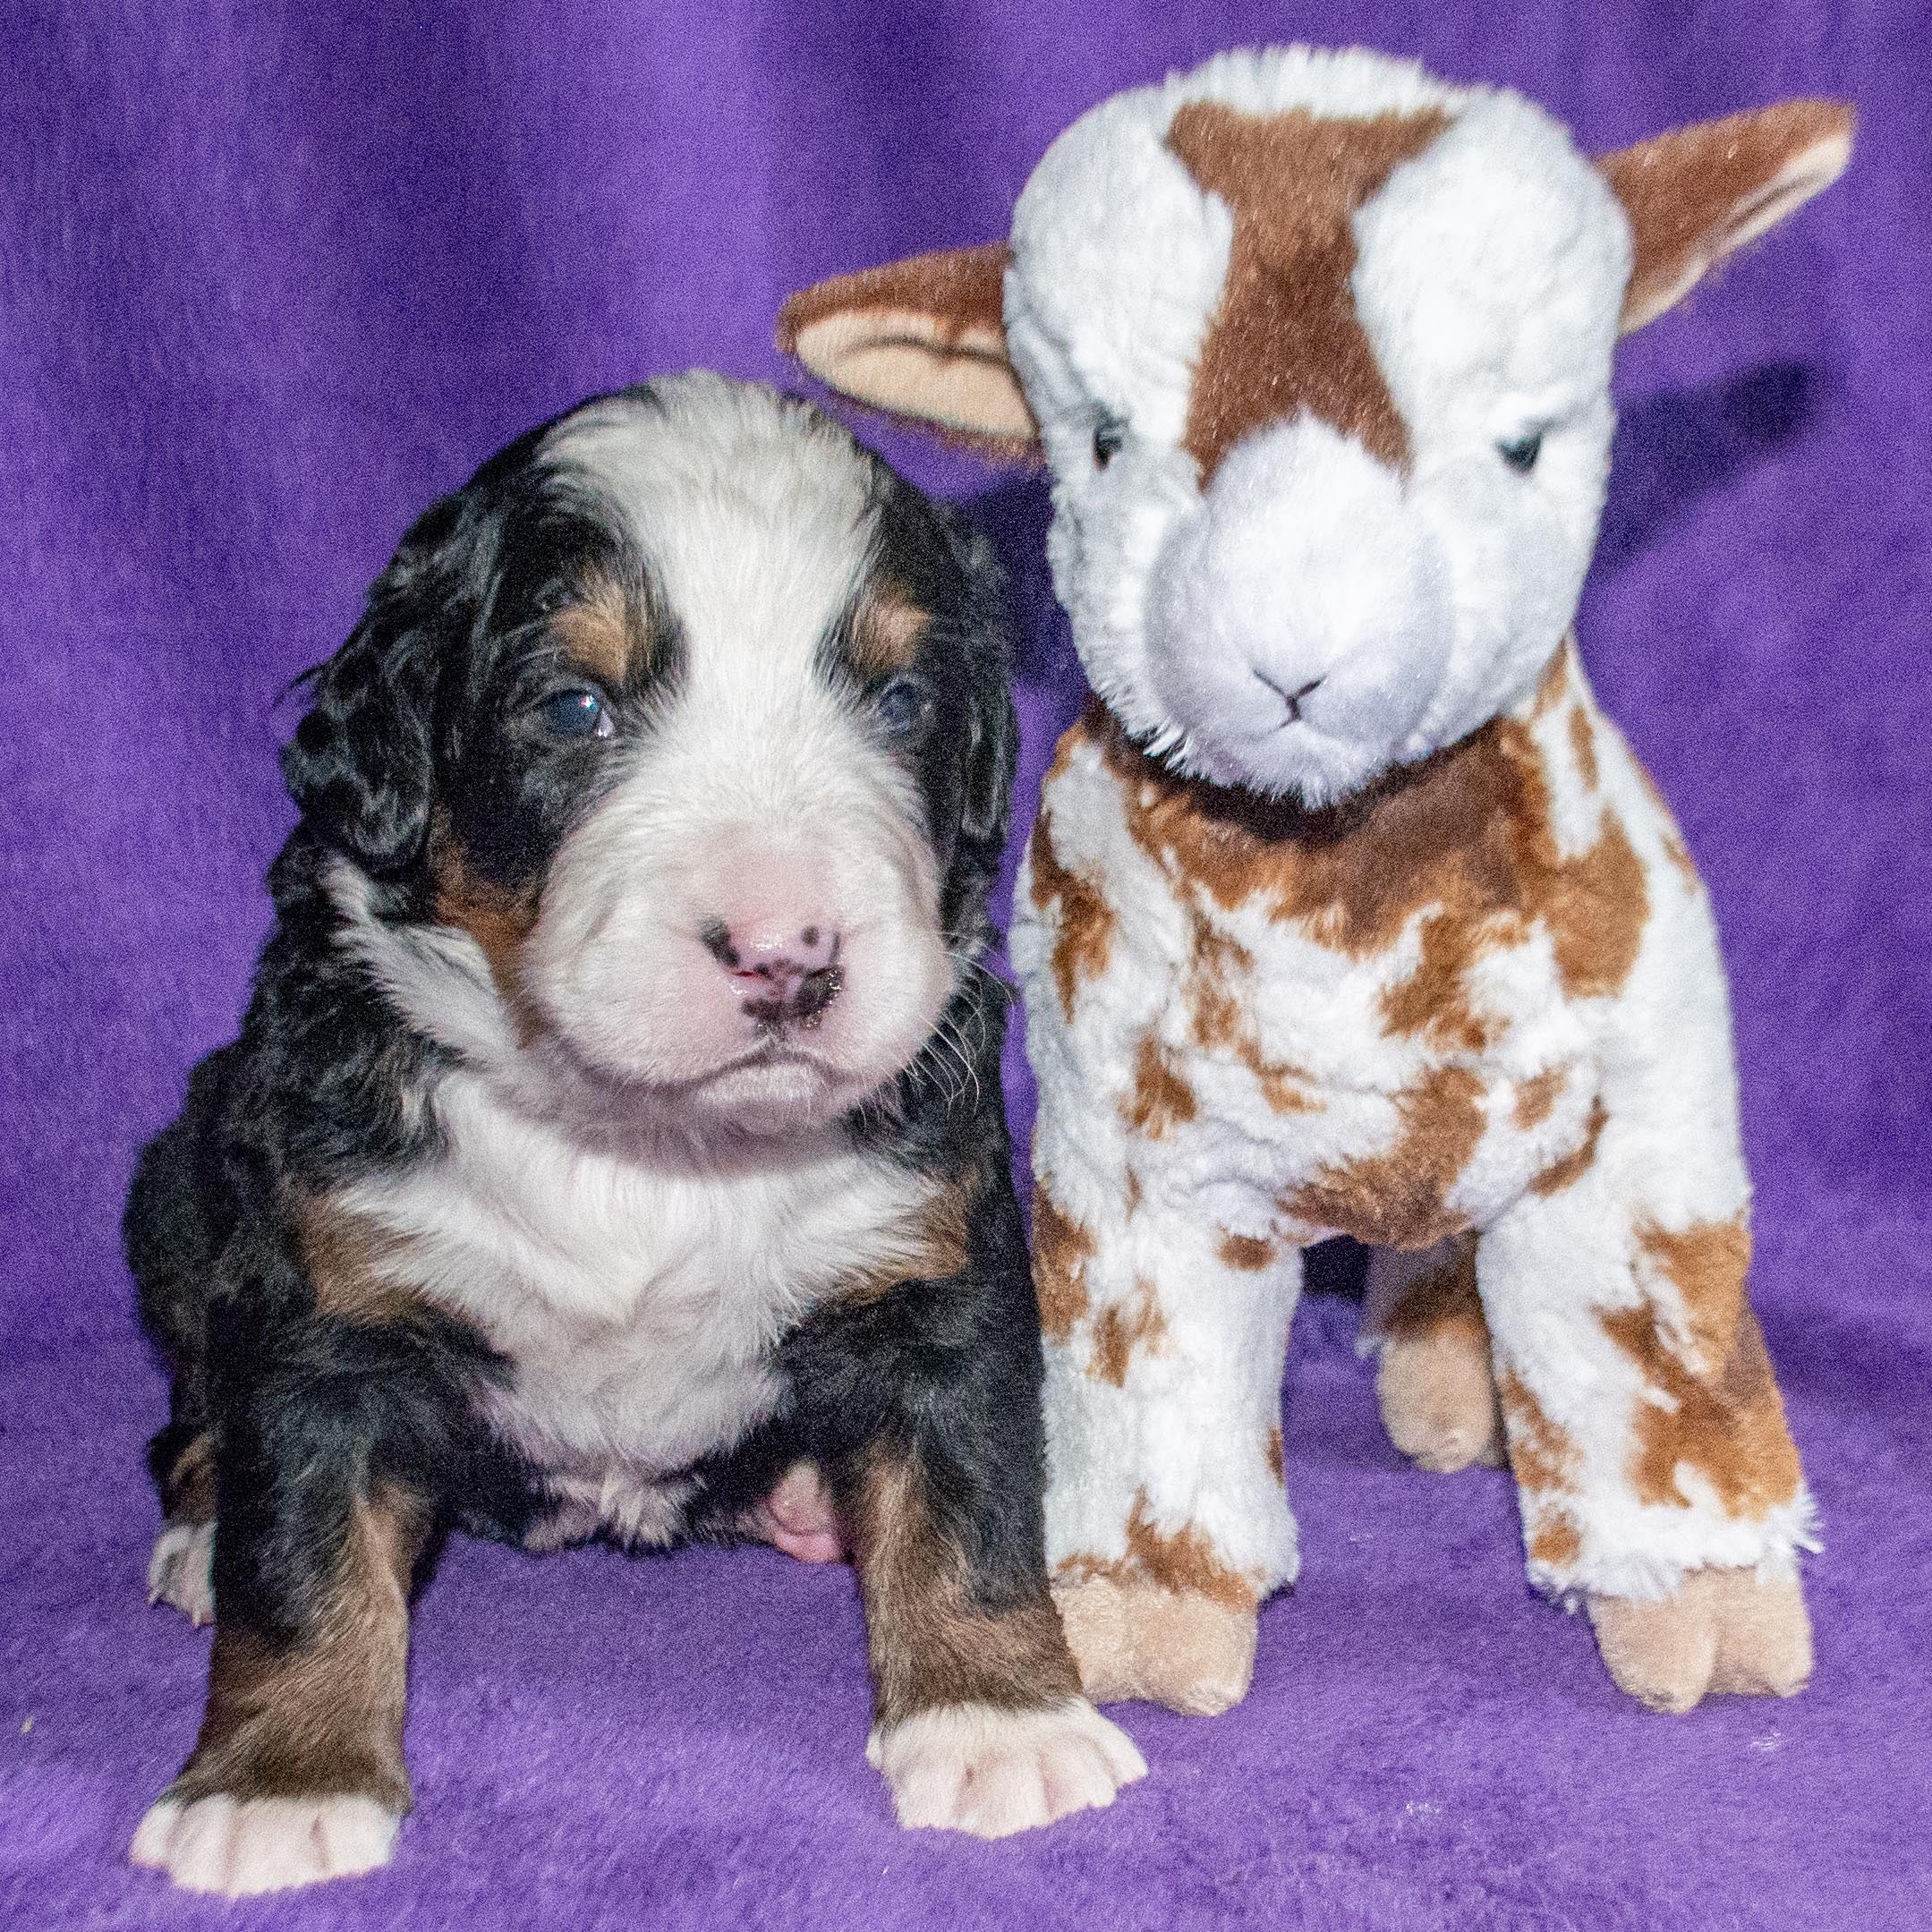 Pendragon a Male Bernese Mountain Dog Puppy Camelot January With Stuffed Animal Baby Goat Toy